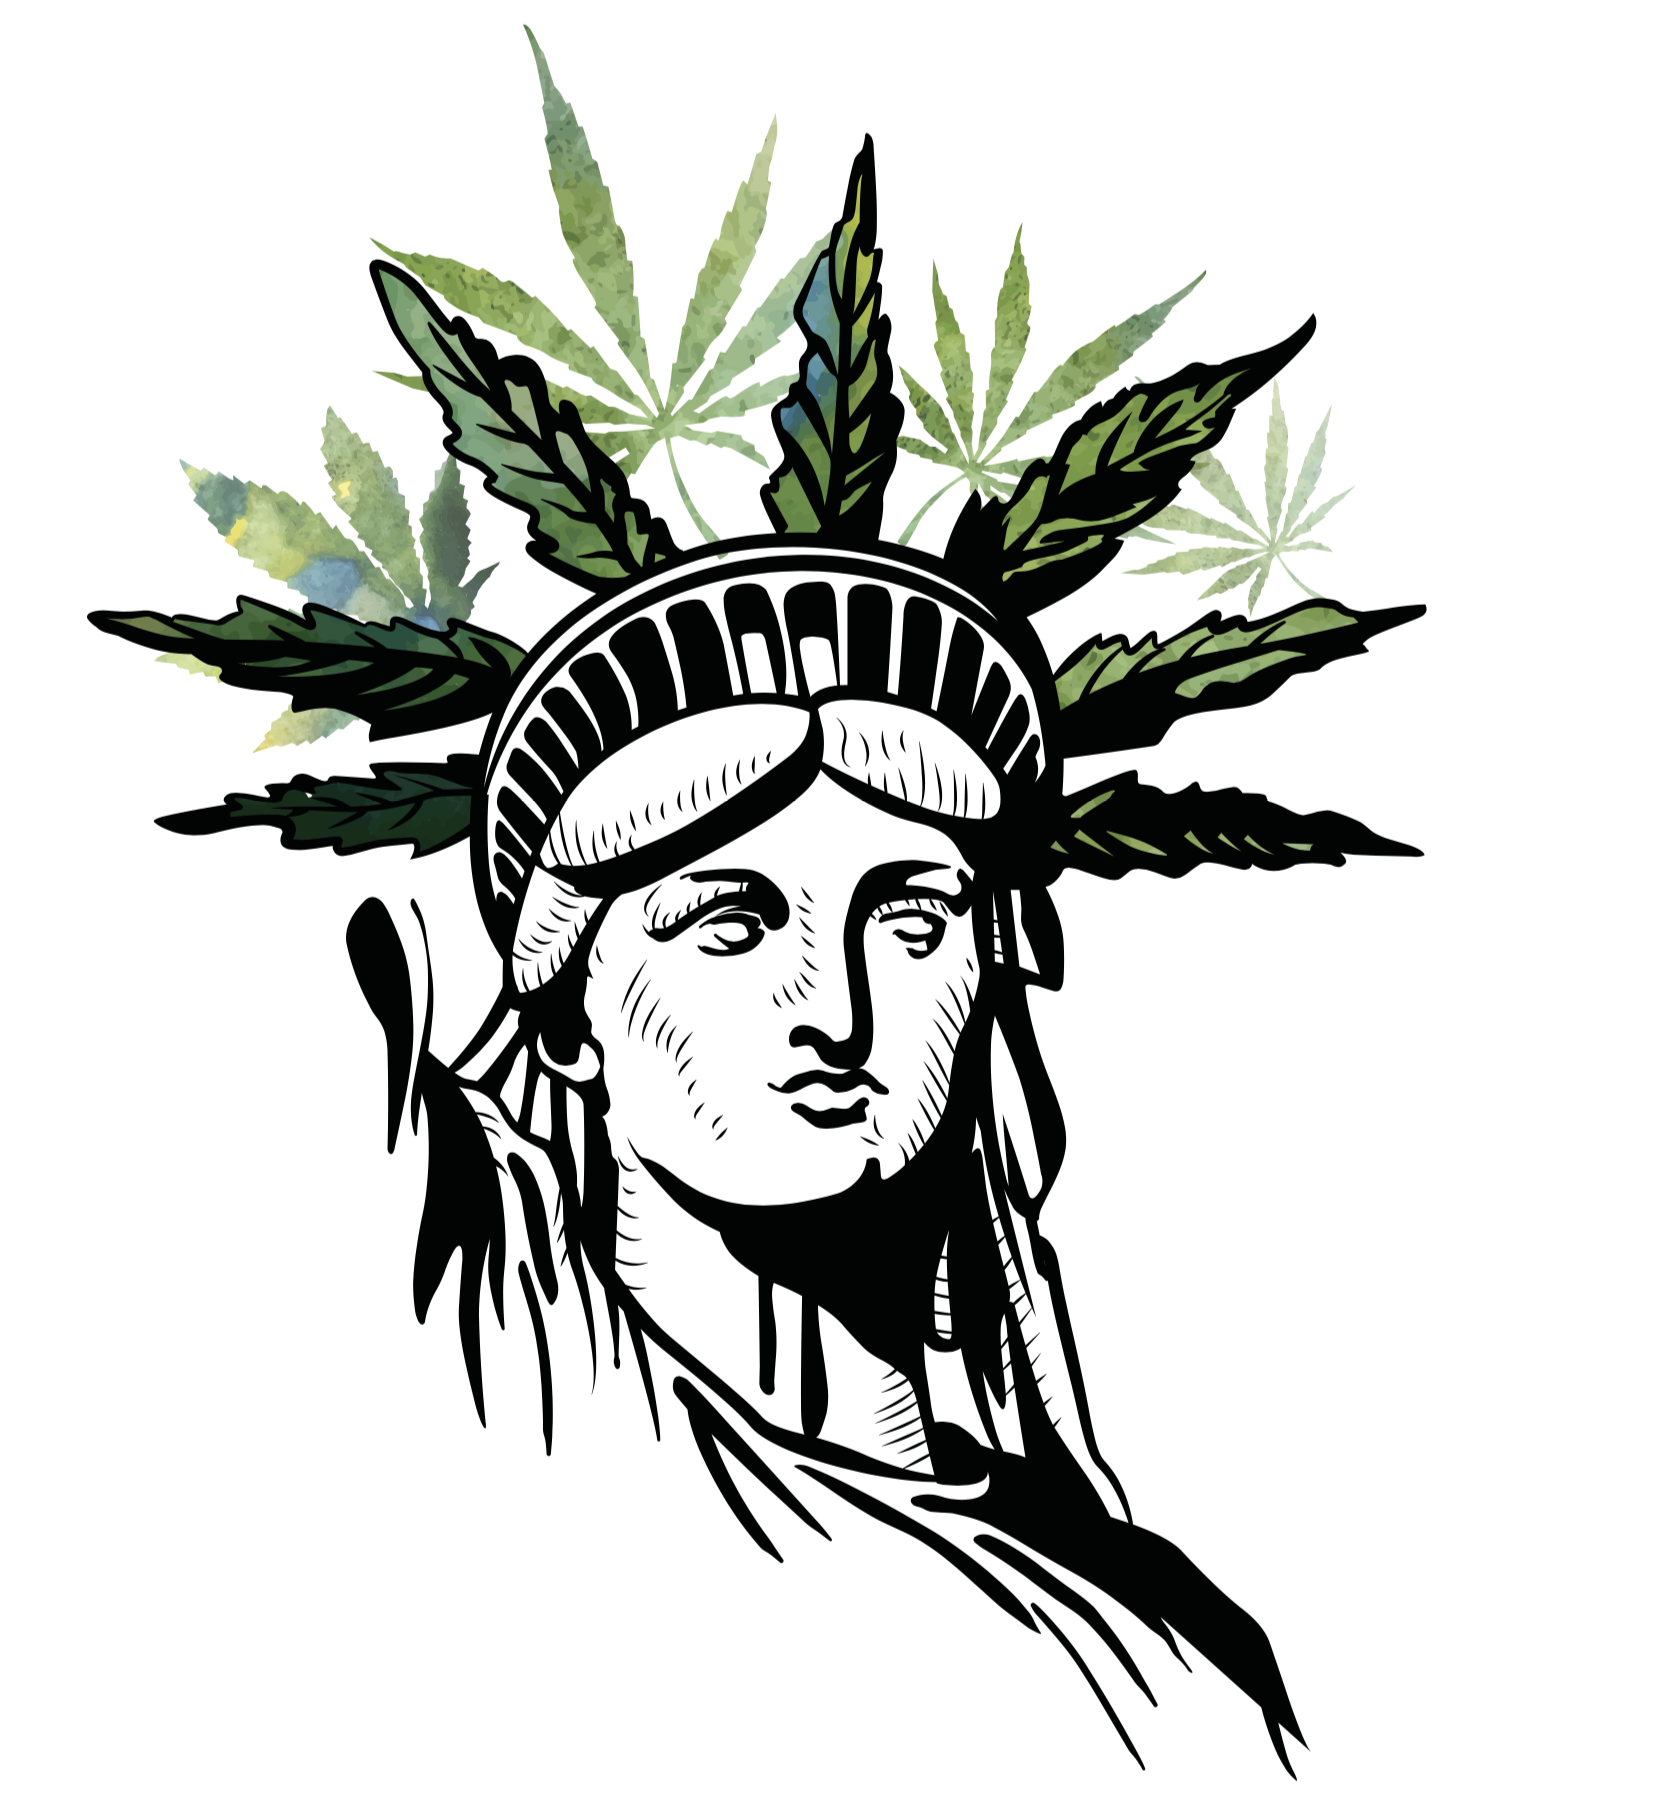 Read more about the article Cannabis Among Top Priorities for New York Legislators in 2020.